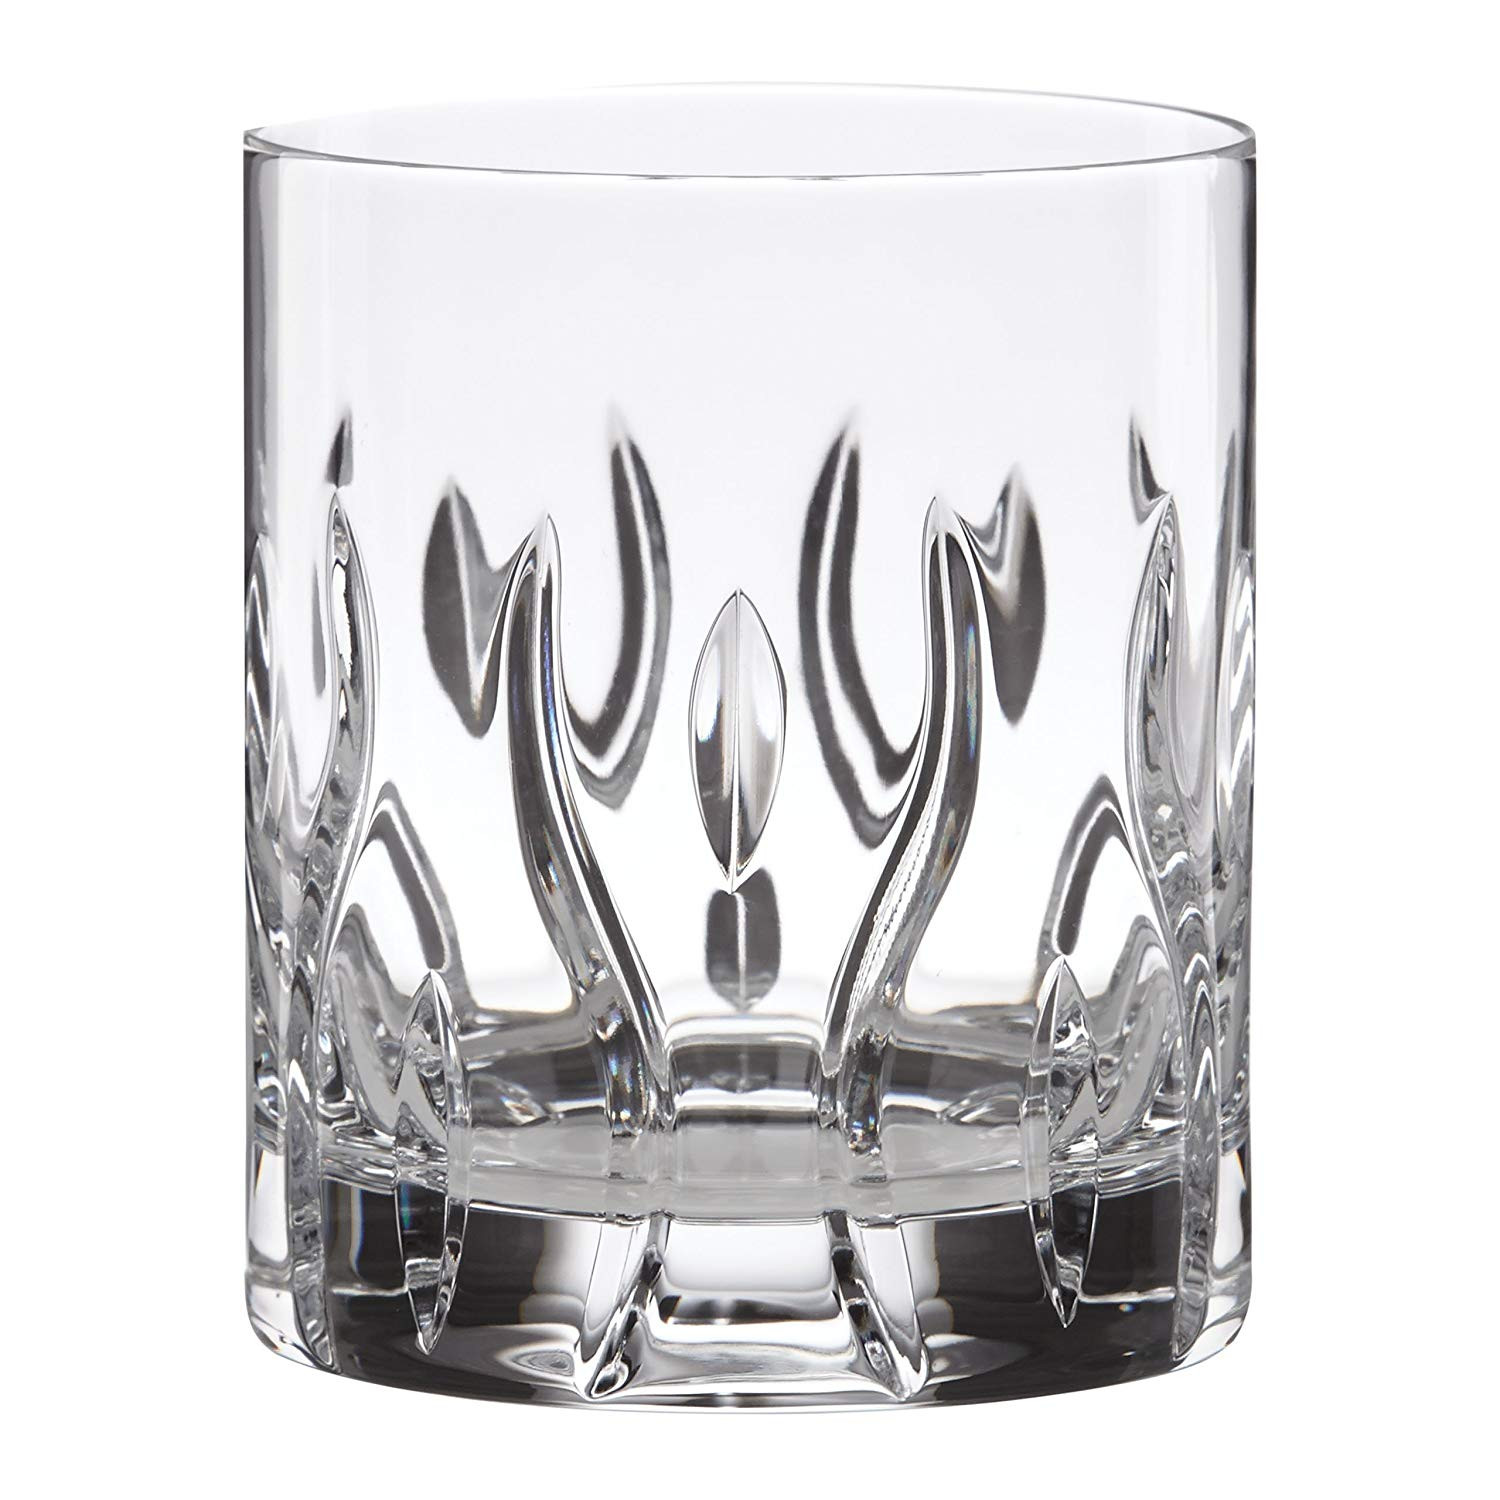 28 Unique Waterford Crystal Lismore Vase 2024 free download waterford crystal lismore vase of amazon com lenox 857141 irish spring darcy double old fashioned with amazon com lenox 857141 irish spring darcy double old fashioned glasses set of 2 clear 